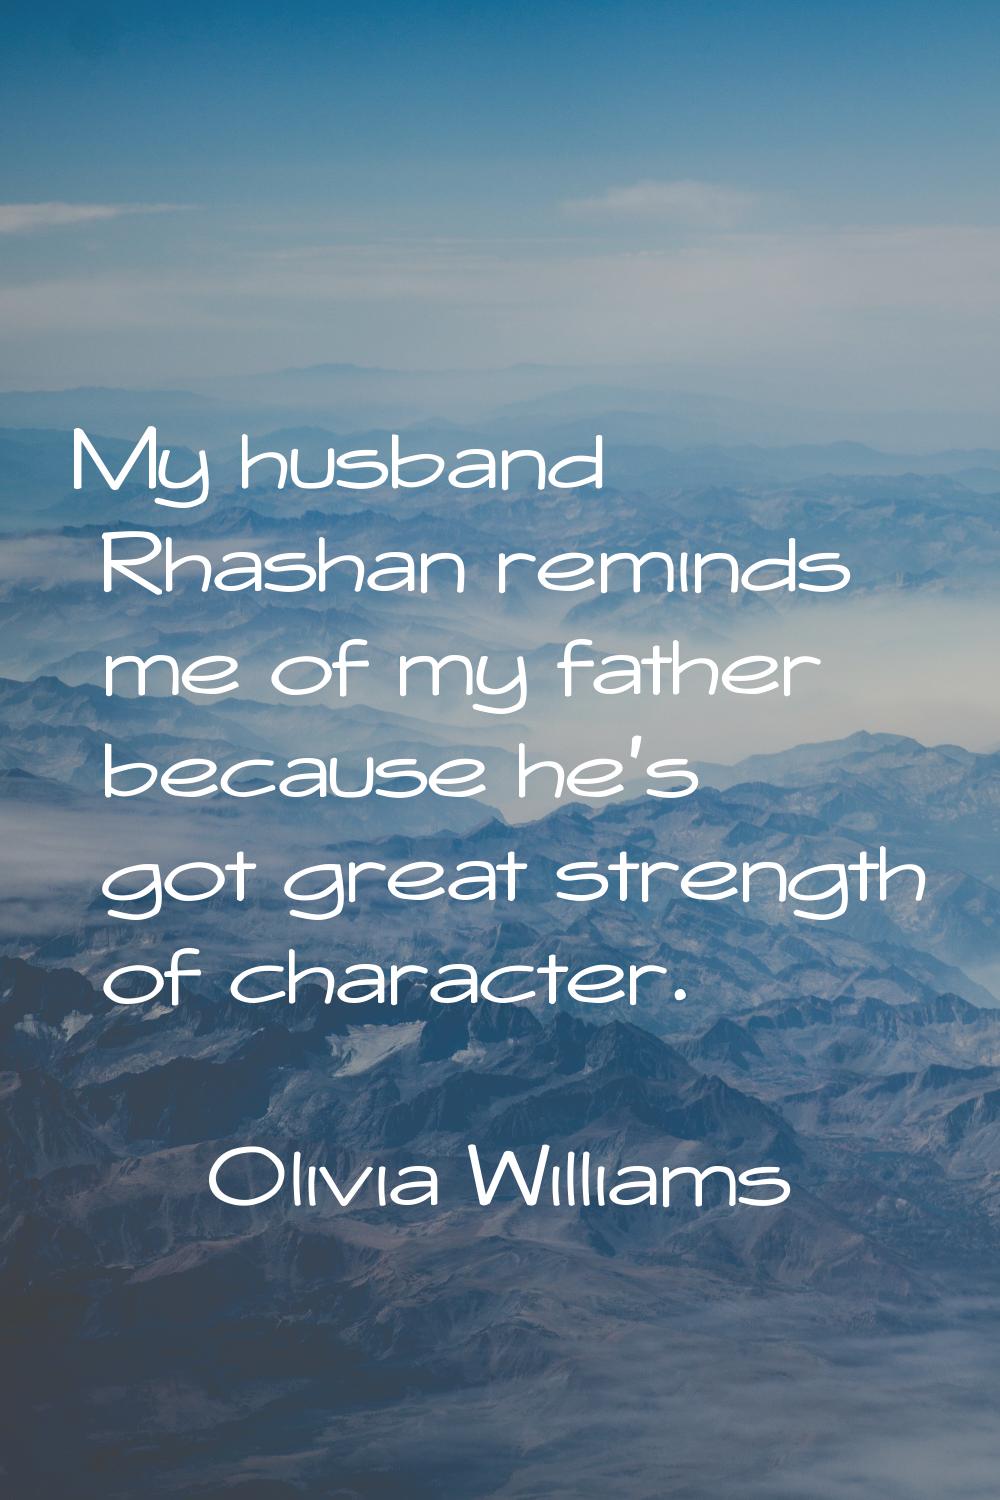 My husband Rhashan reminds me of my father because he's got great strength of character.